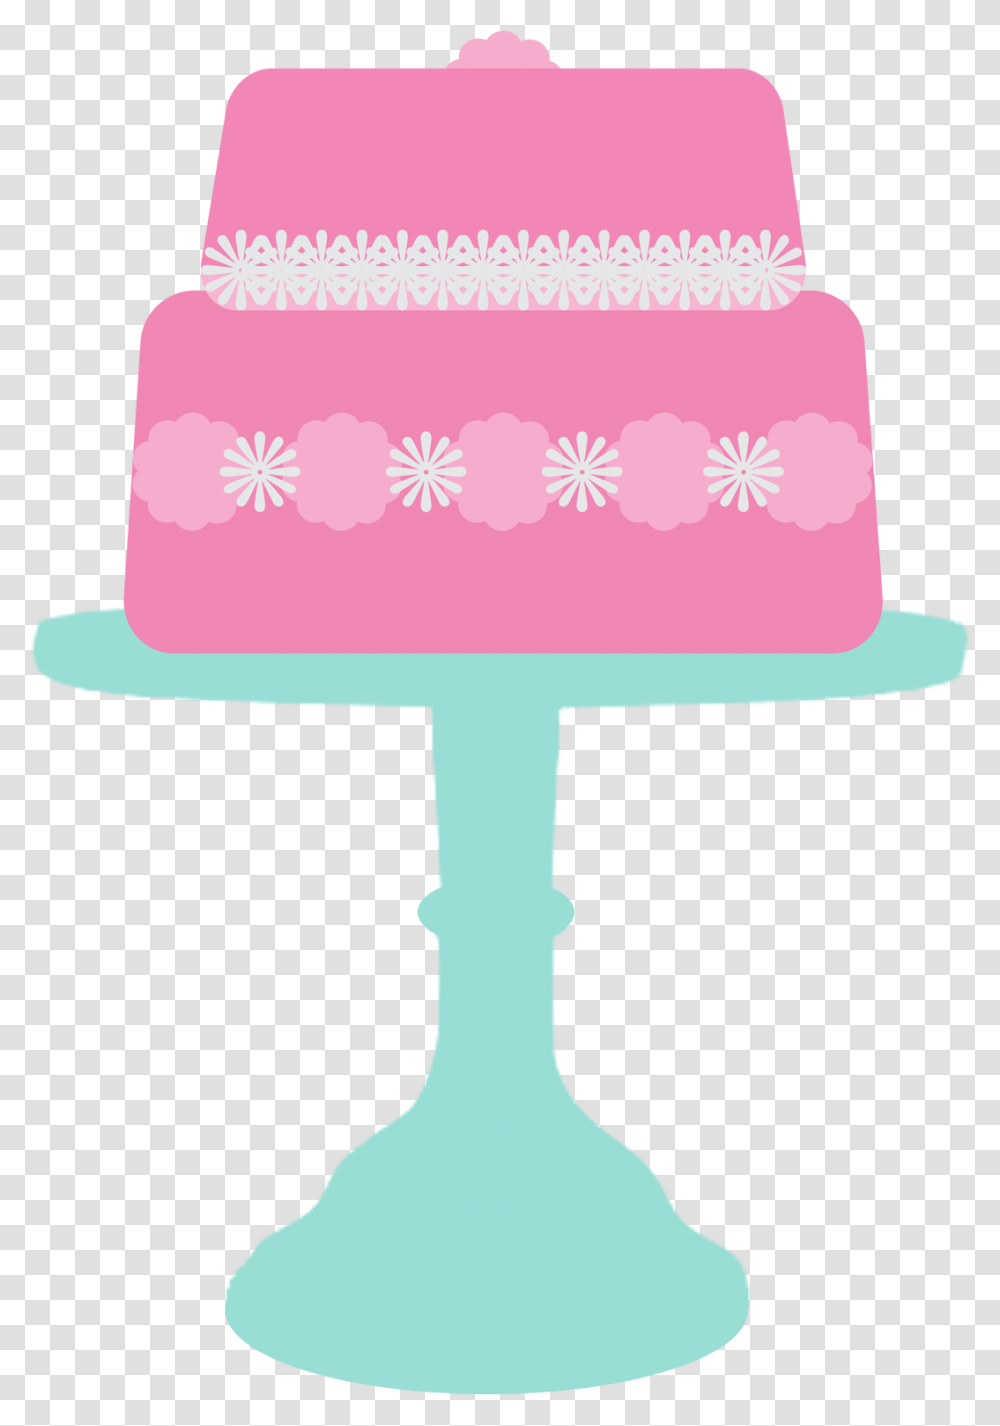 Free Bake Sale Flyer Template Bake Sale Flyers Free Cake Stand Clip Art, Dessert, Food, Birthday Cake, Icing Transparent Png